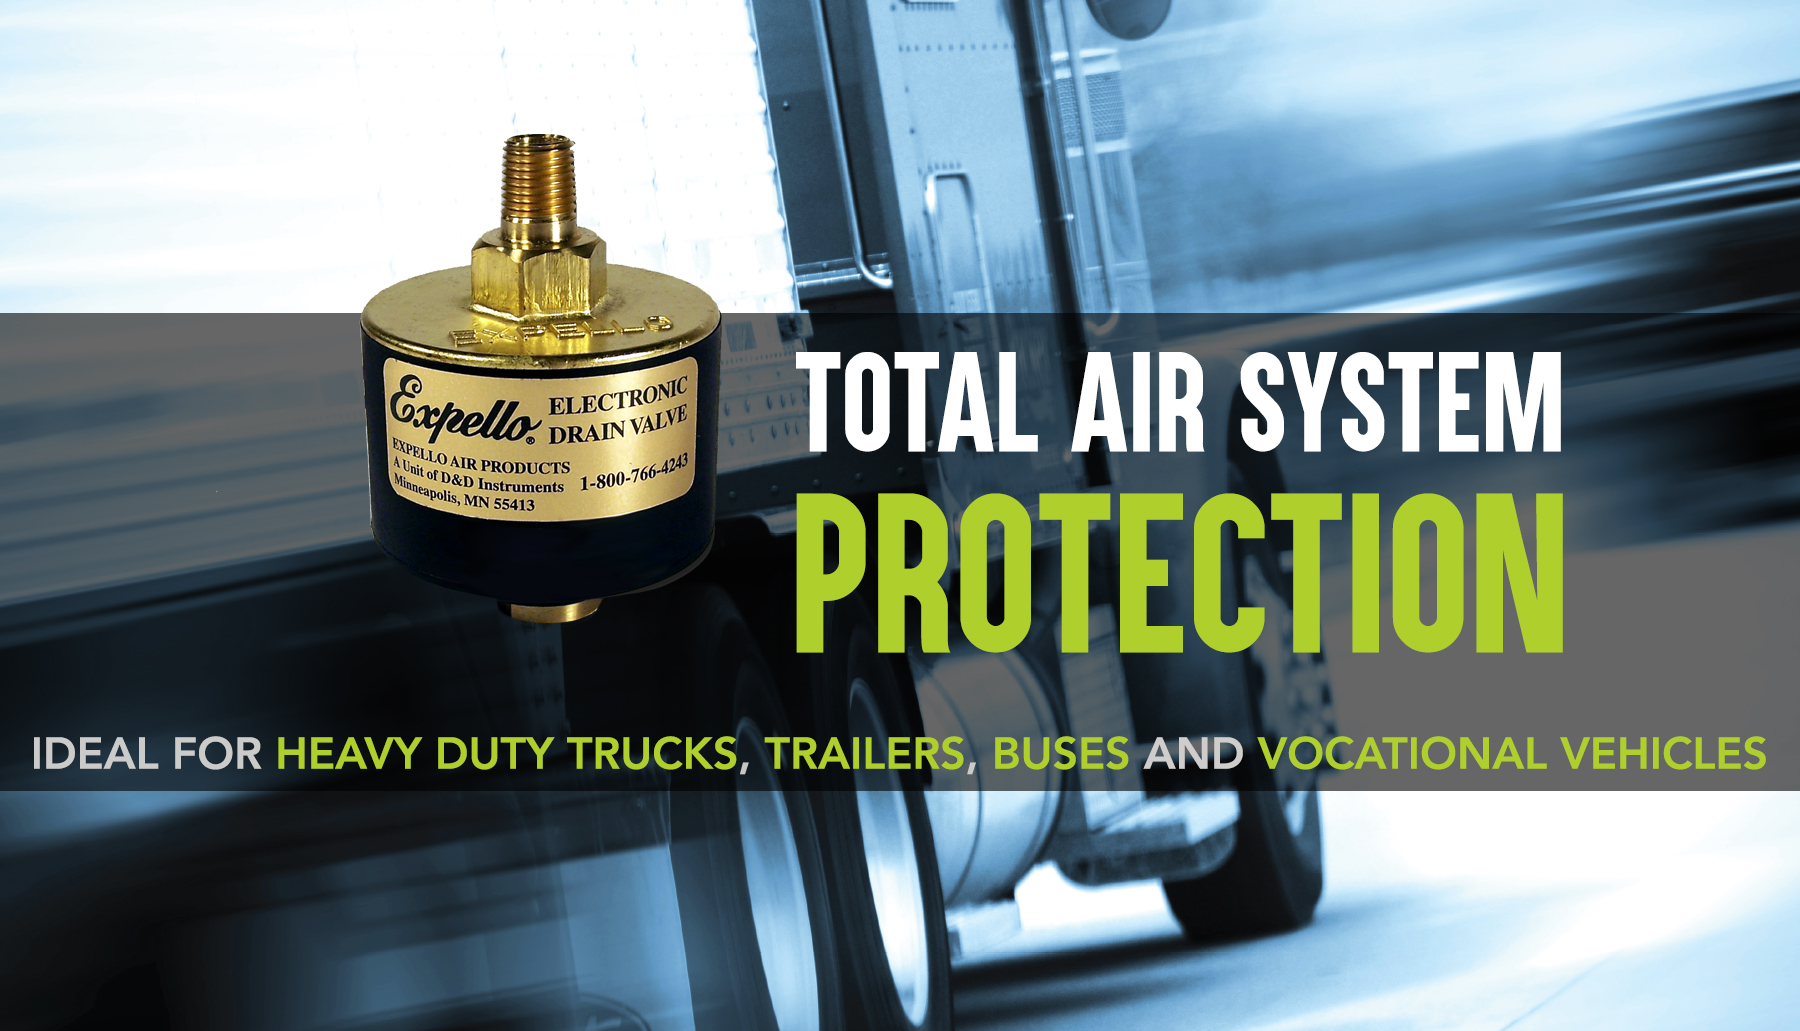 Air Compressors for Trucks & Buses